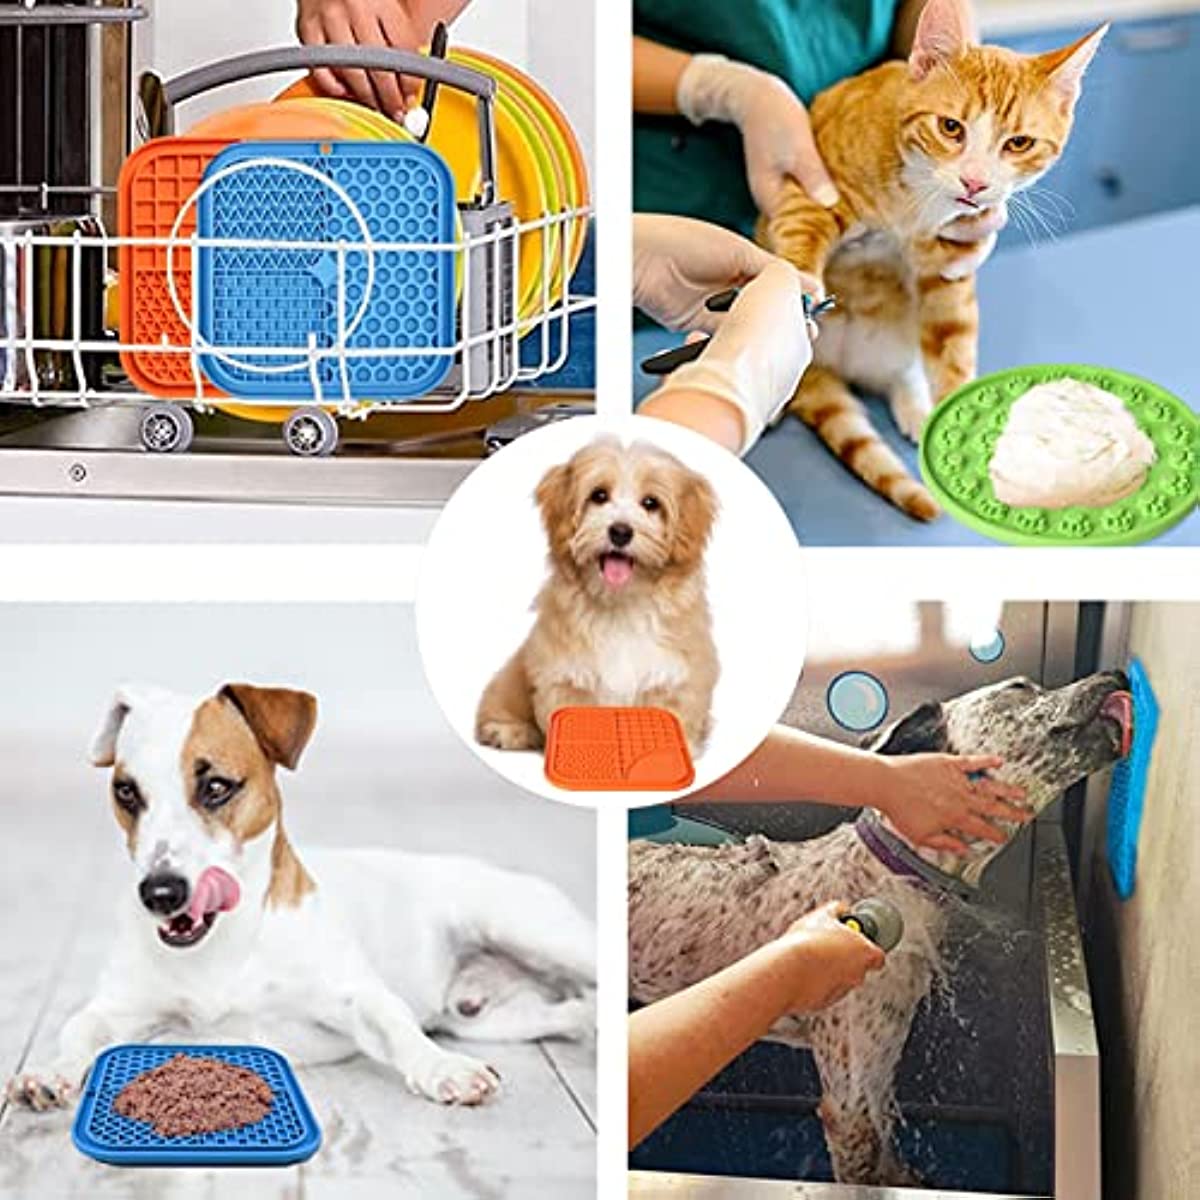 Dog Licking Mat for Anxiety Peanut Butter Slow Feeder Dog Bowls Dog Licking  Pad with Strong Suction to Wall for Pet Bathing,Grooming,and Dog Training